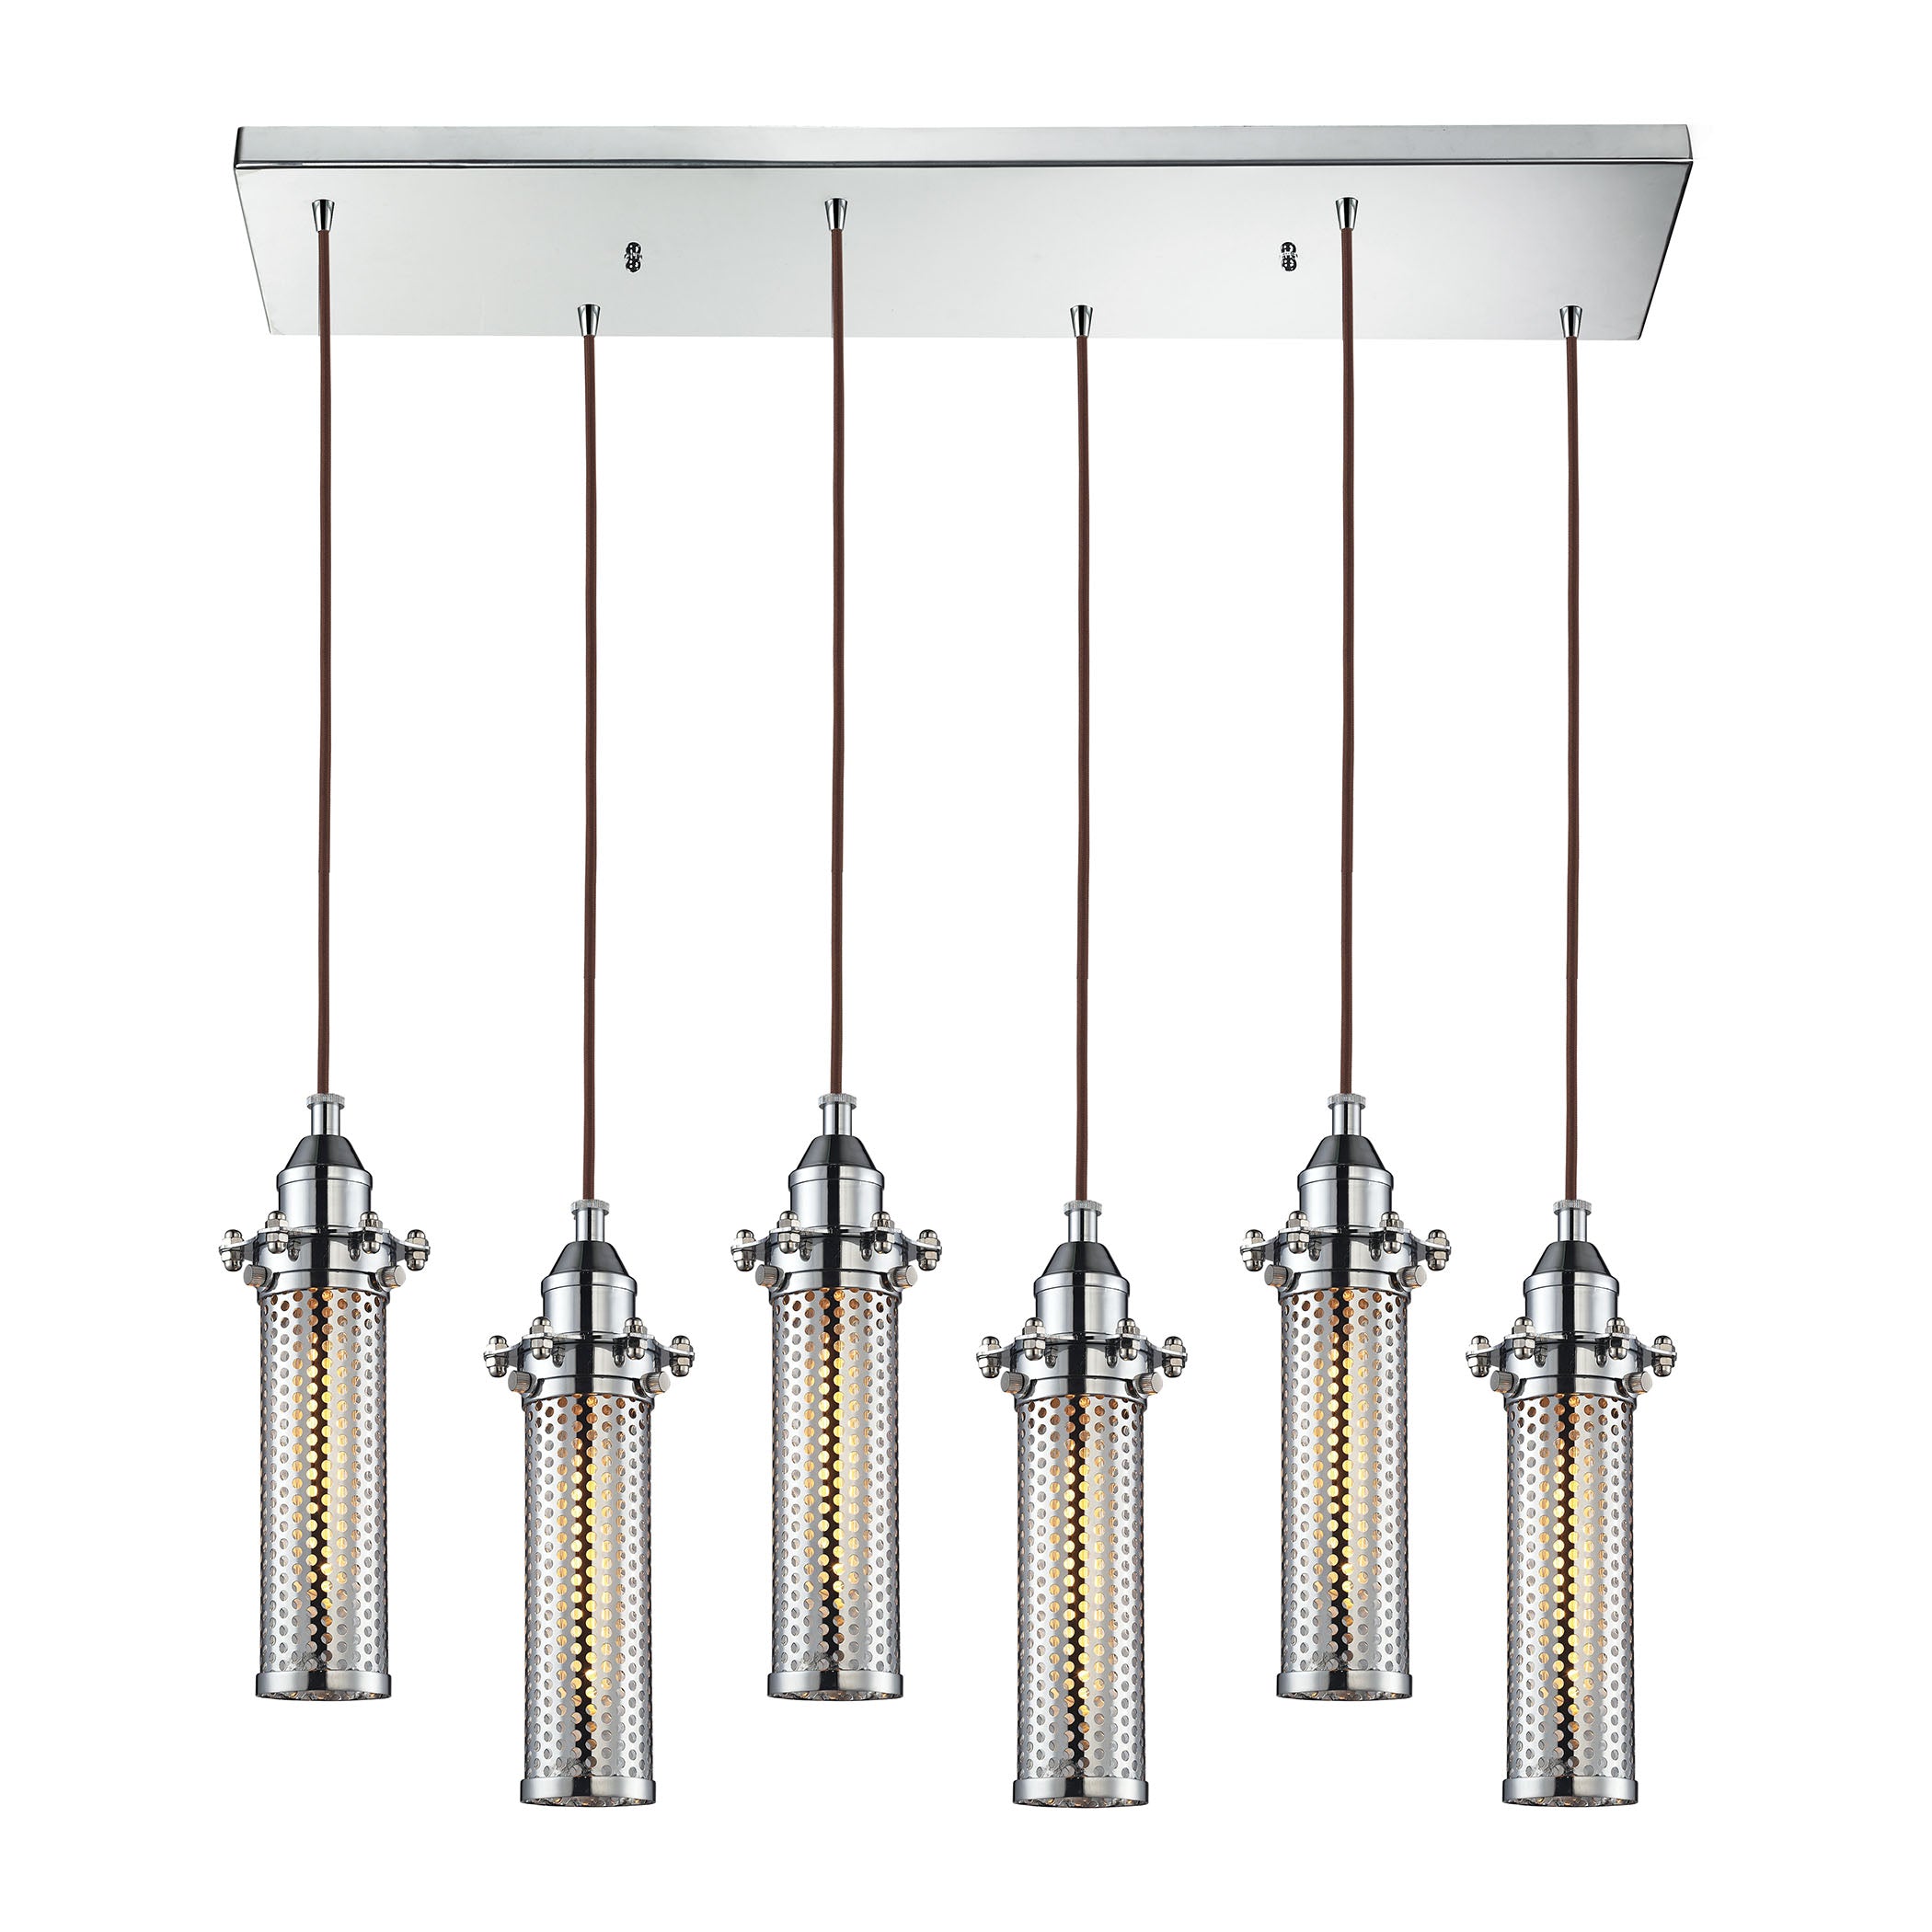 ELK Lighting 66315/6RC Fulton 6-Light Rectangular Pendant Fixture in Polished Chrome with Perforated Metal Shade